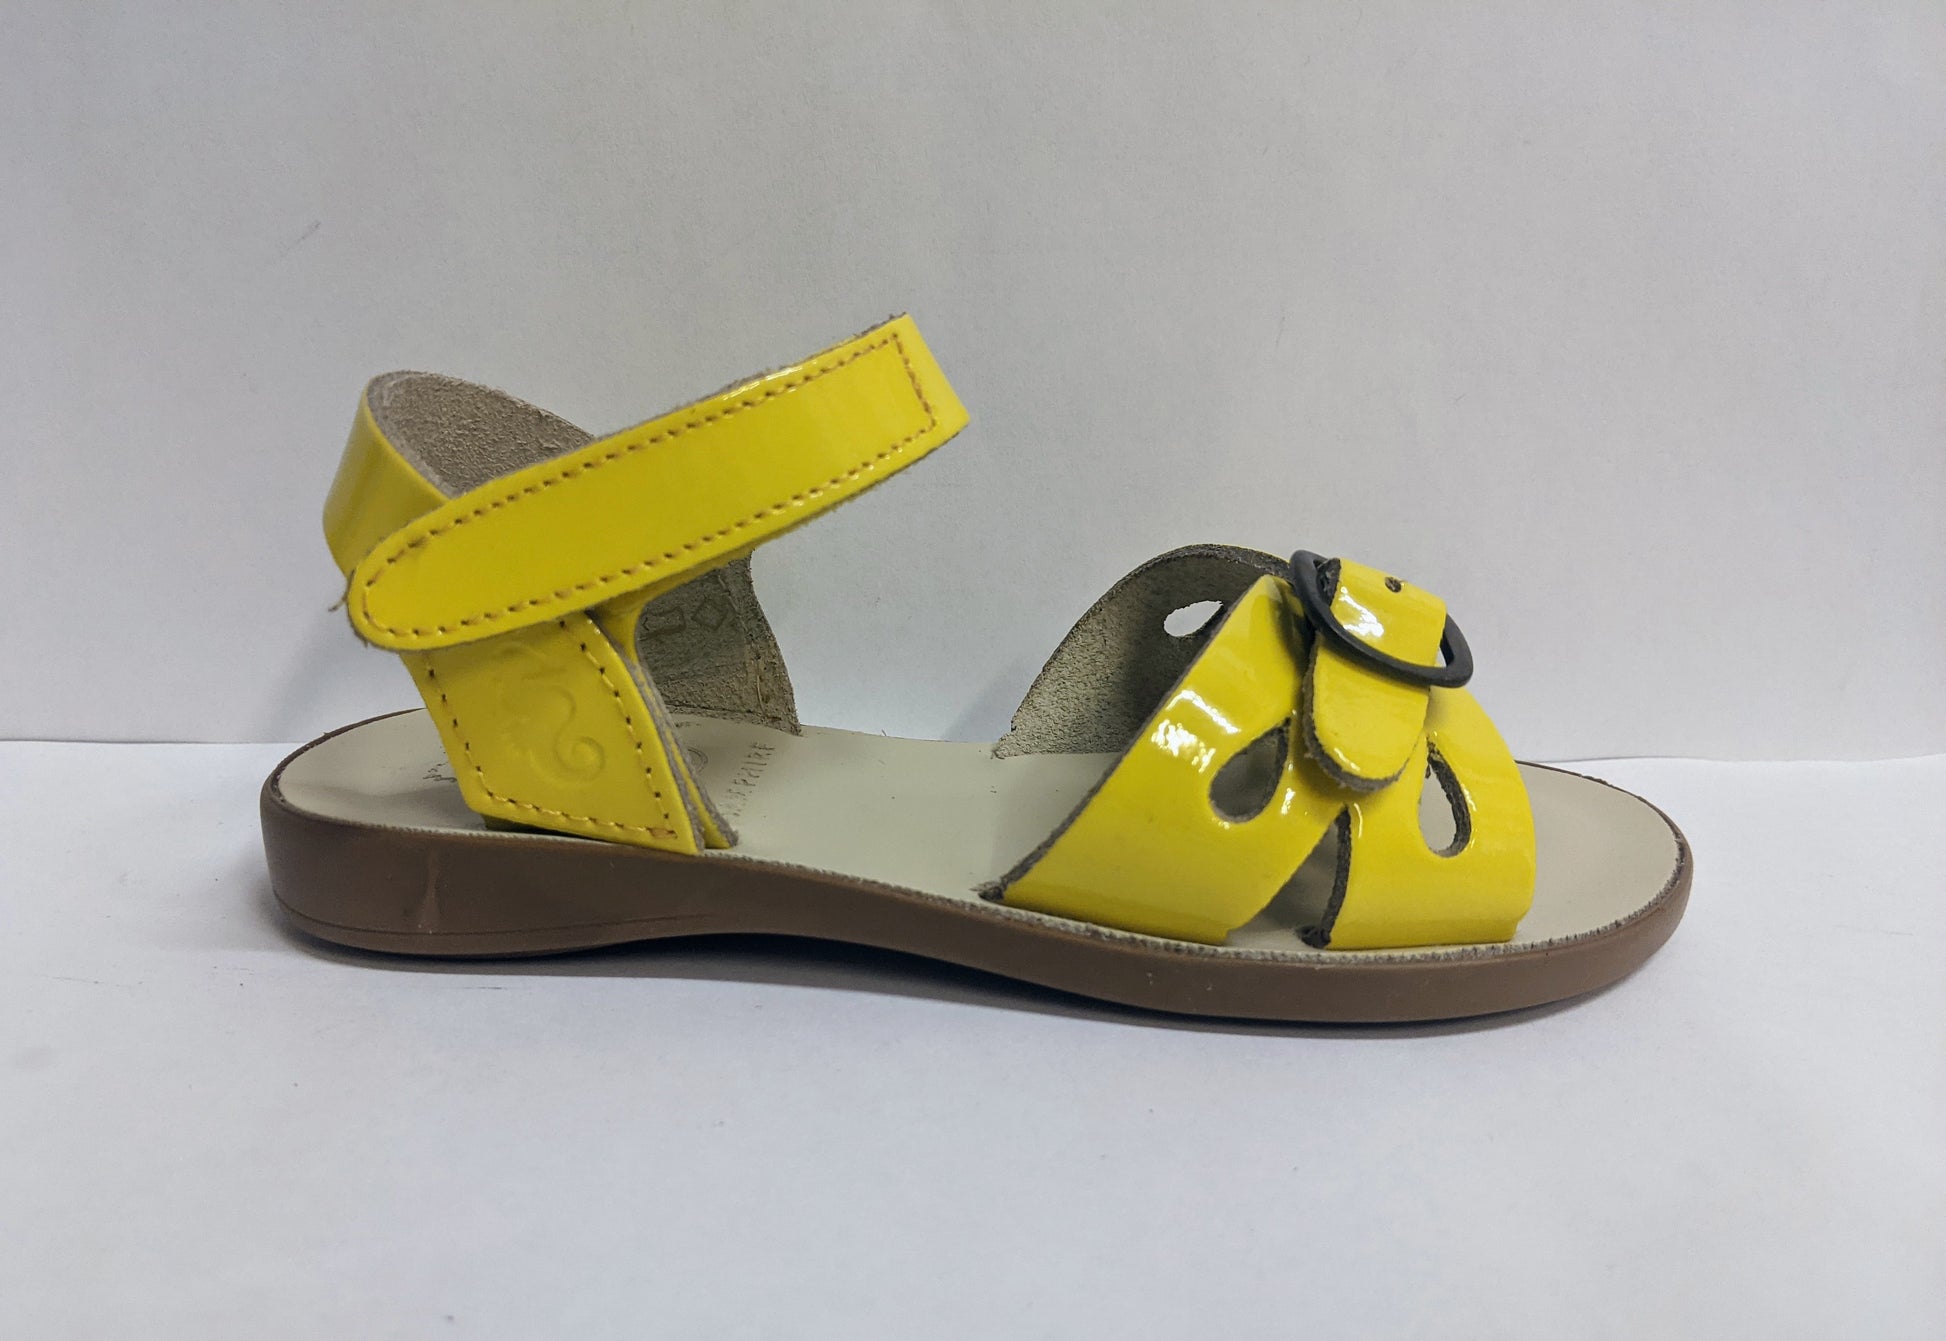 A girls sandal by Petasil Samphire, style Marella 2, in yellow patent with velcro fastening. Right side view.